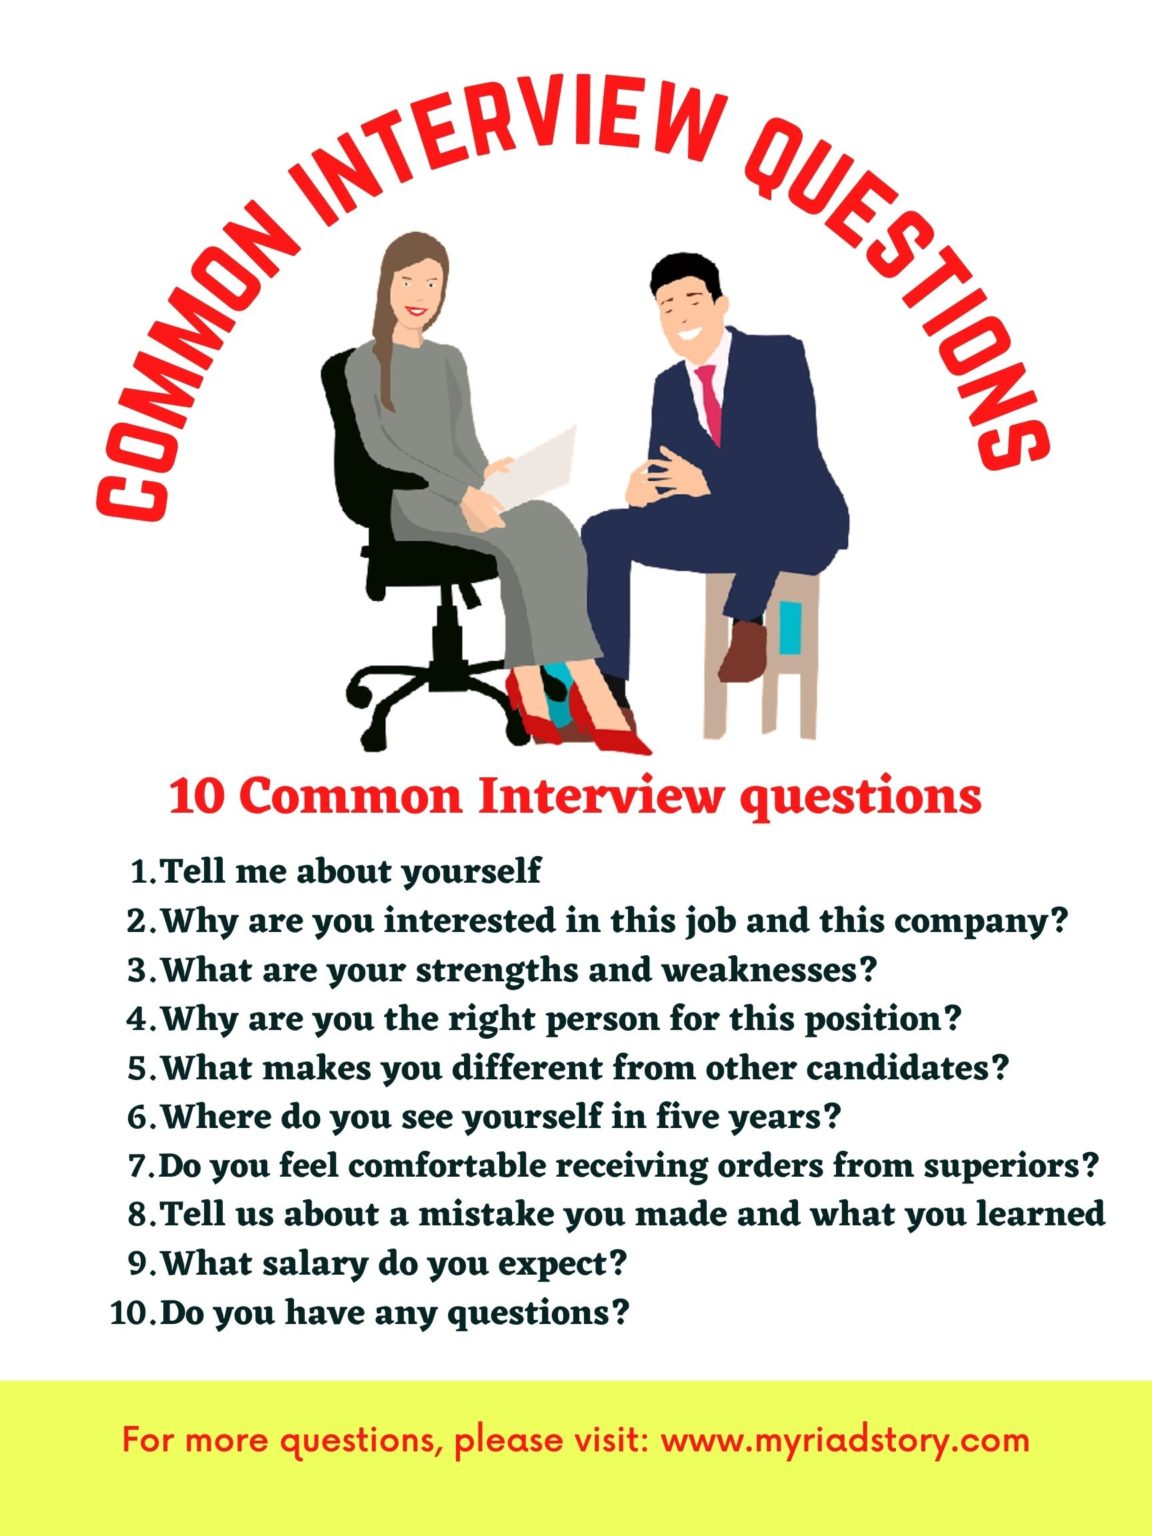 Top 10 Most Common Interview Questions for freshers - Myriadstory